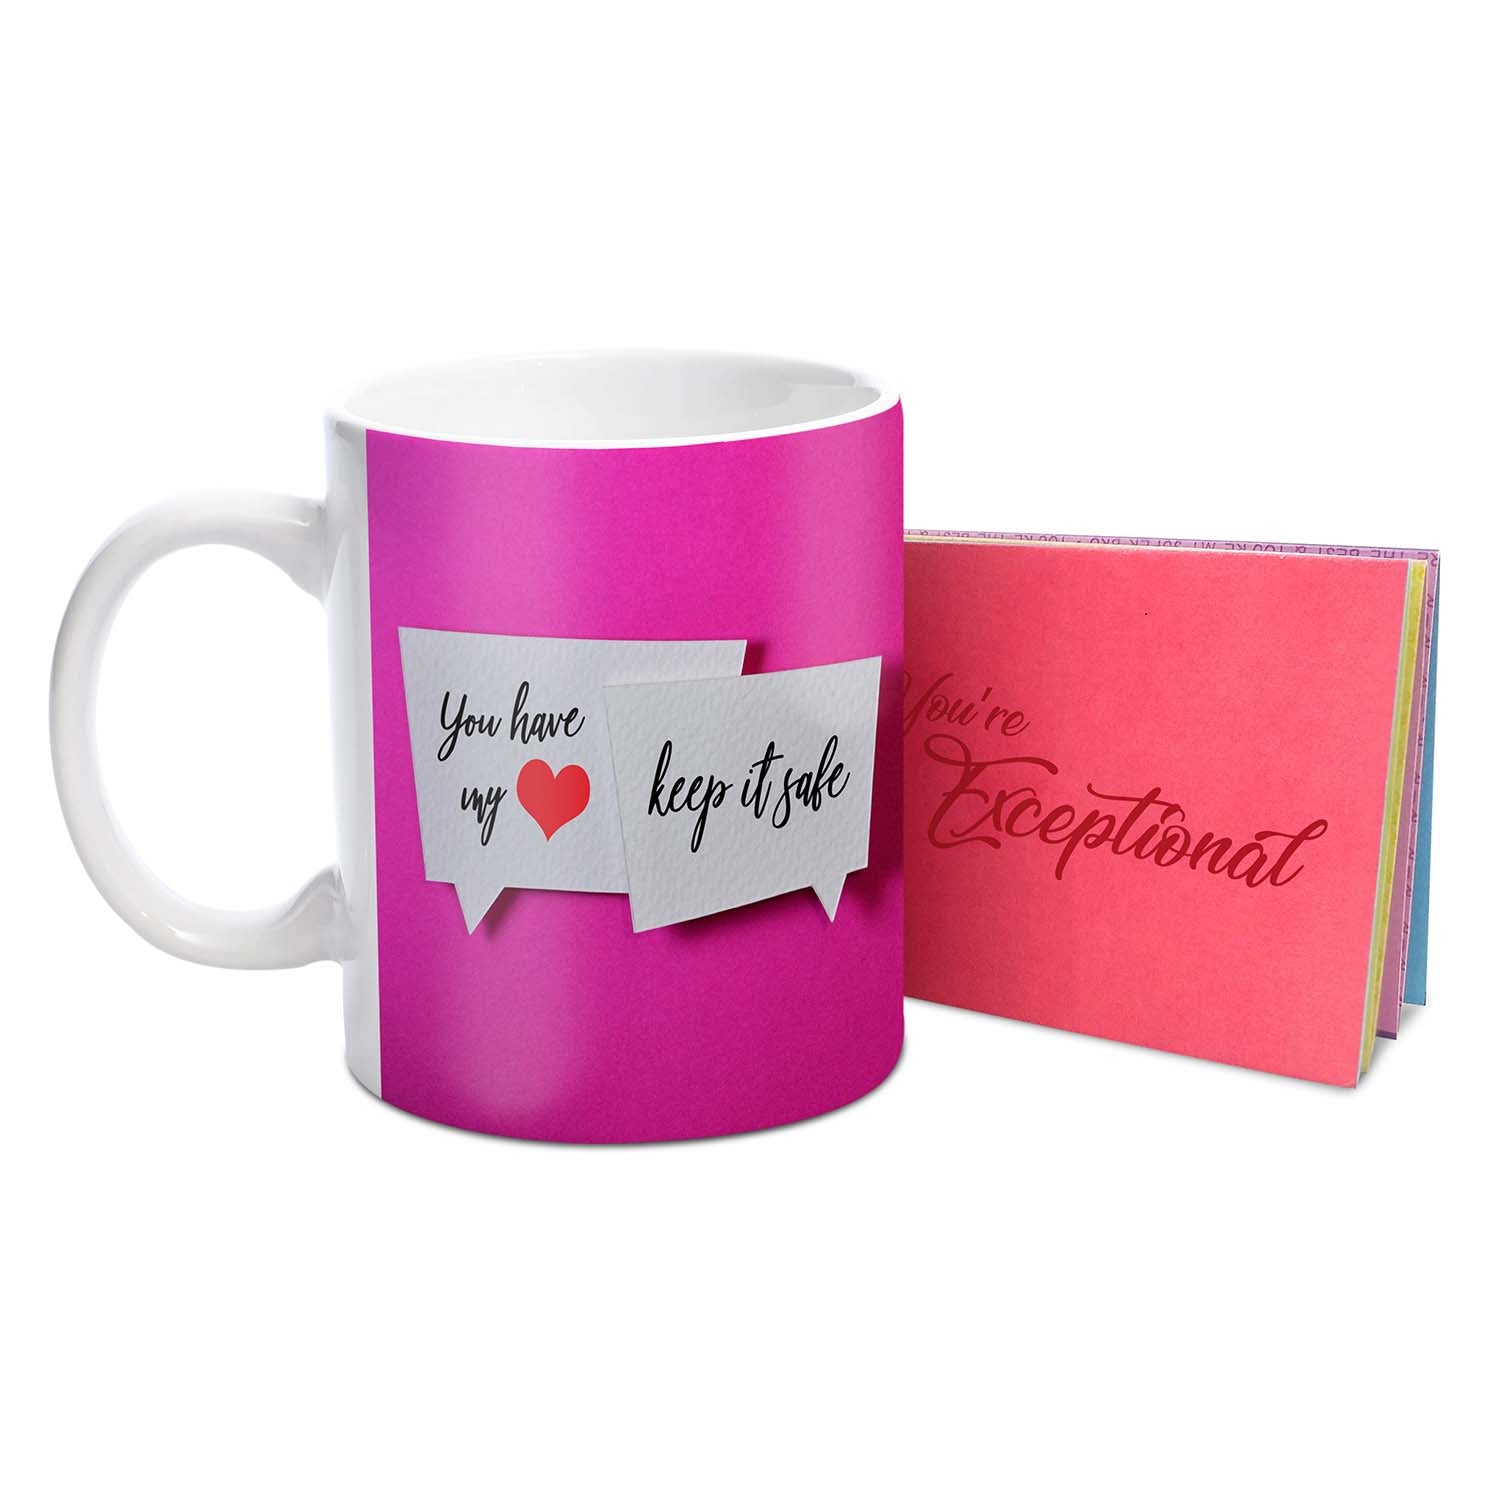 You have my heart Mug with Multifold Card